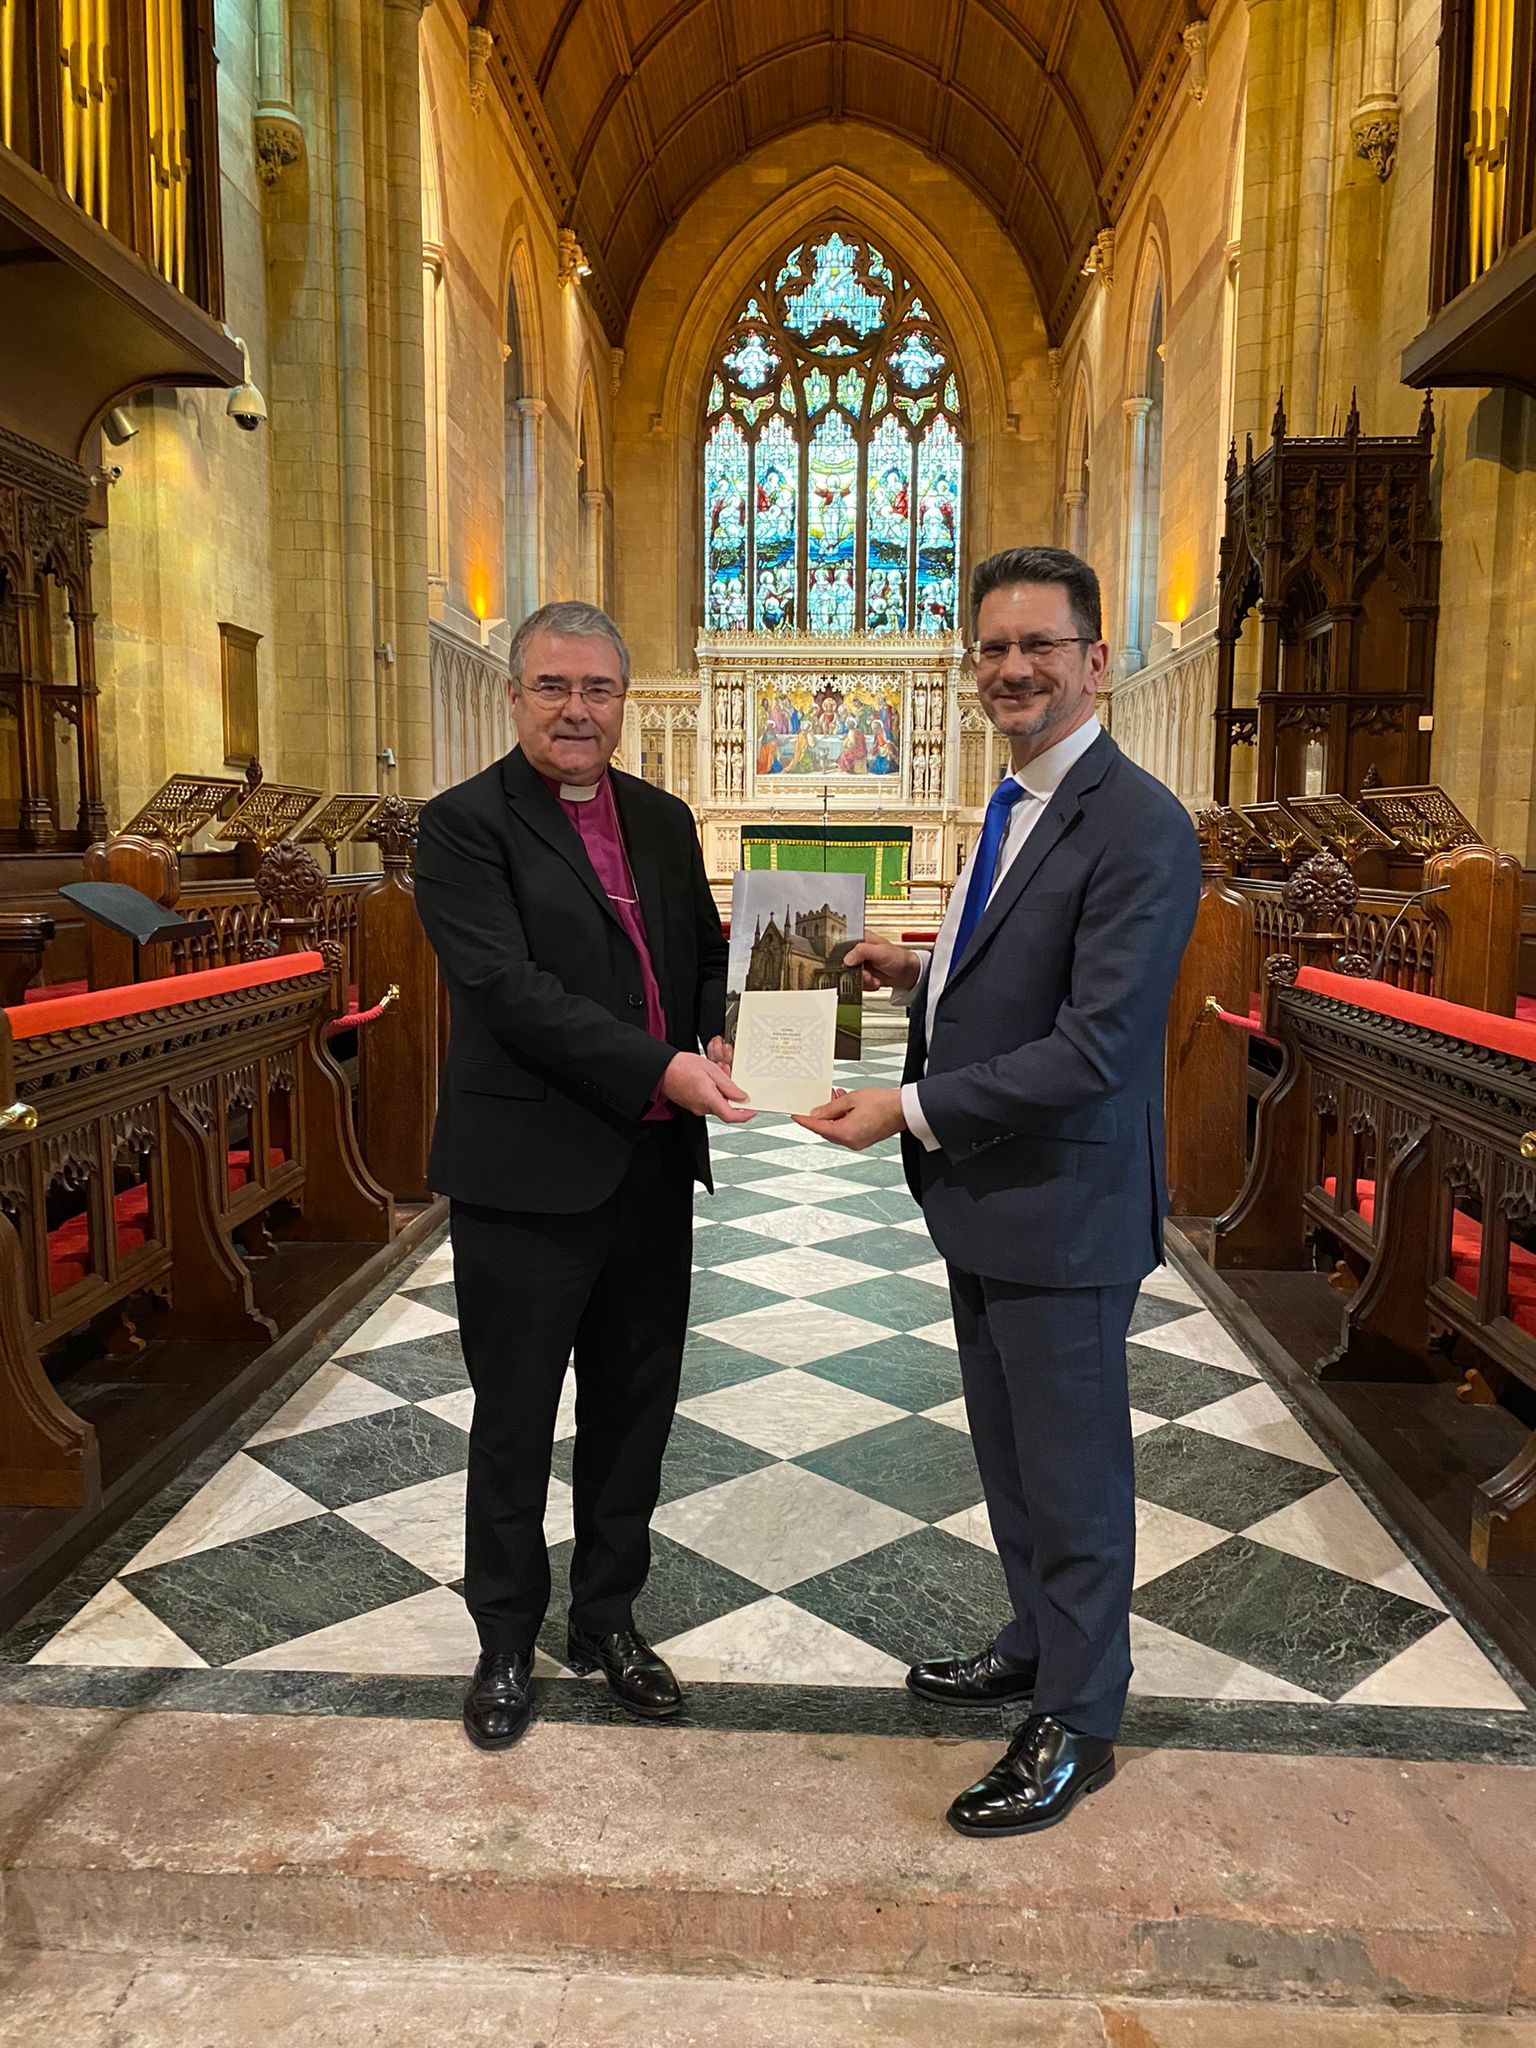 The Archbishop of Armagh, the Most Revd John McDowell with the Minister of State, Steve Baker MP.